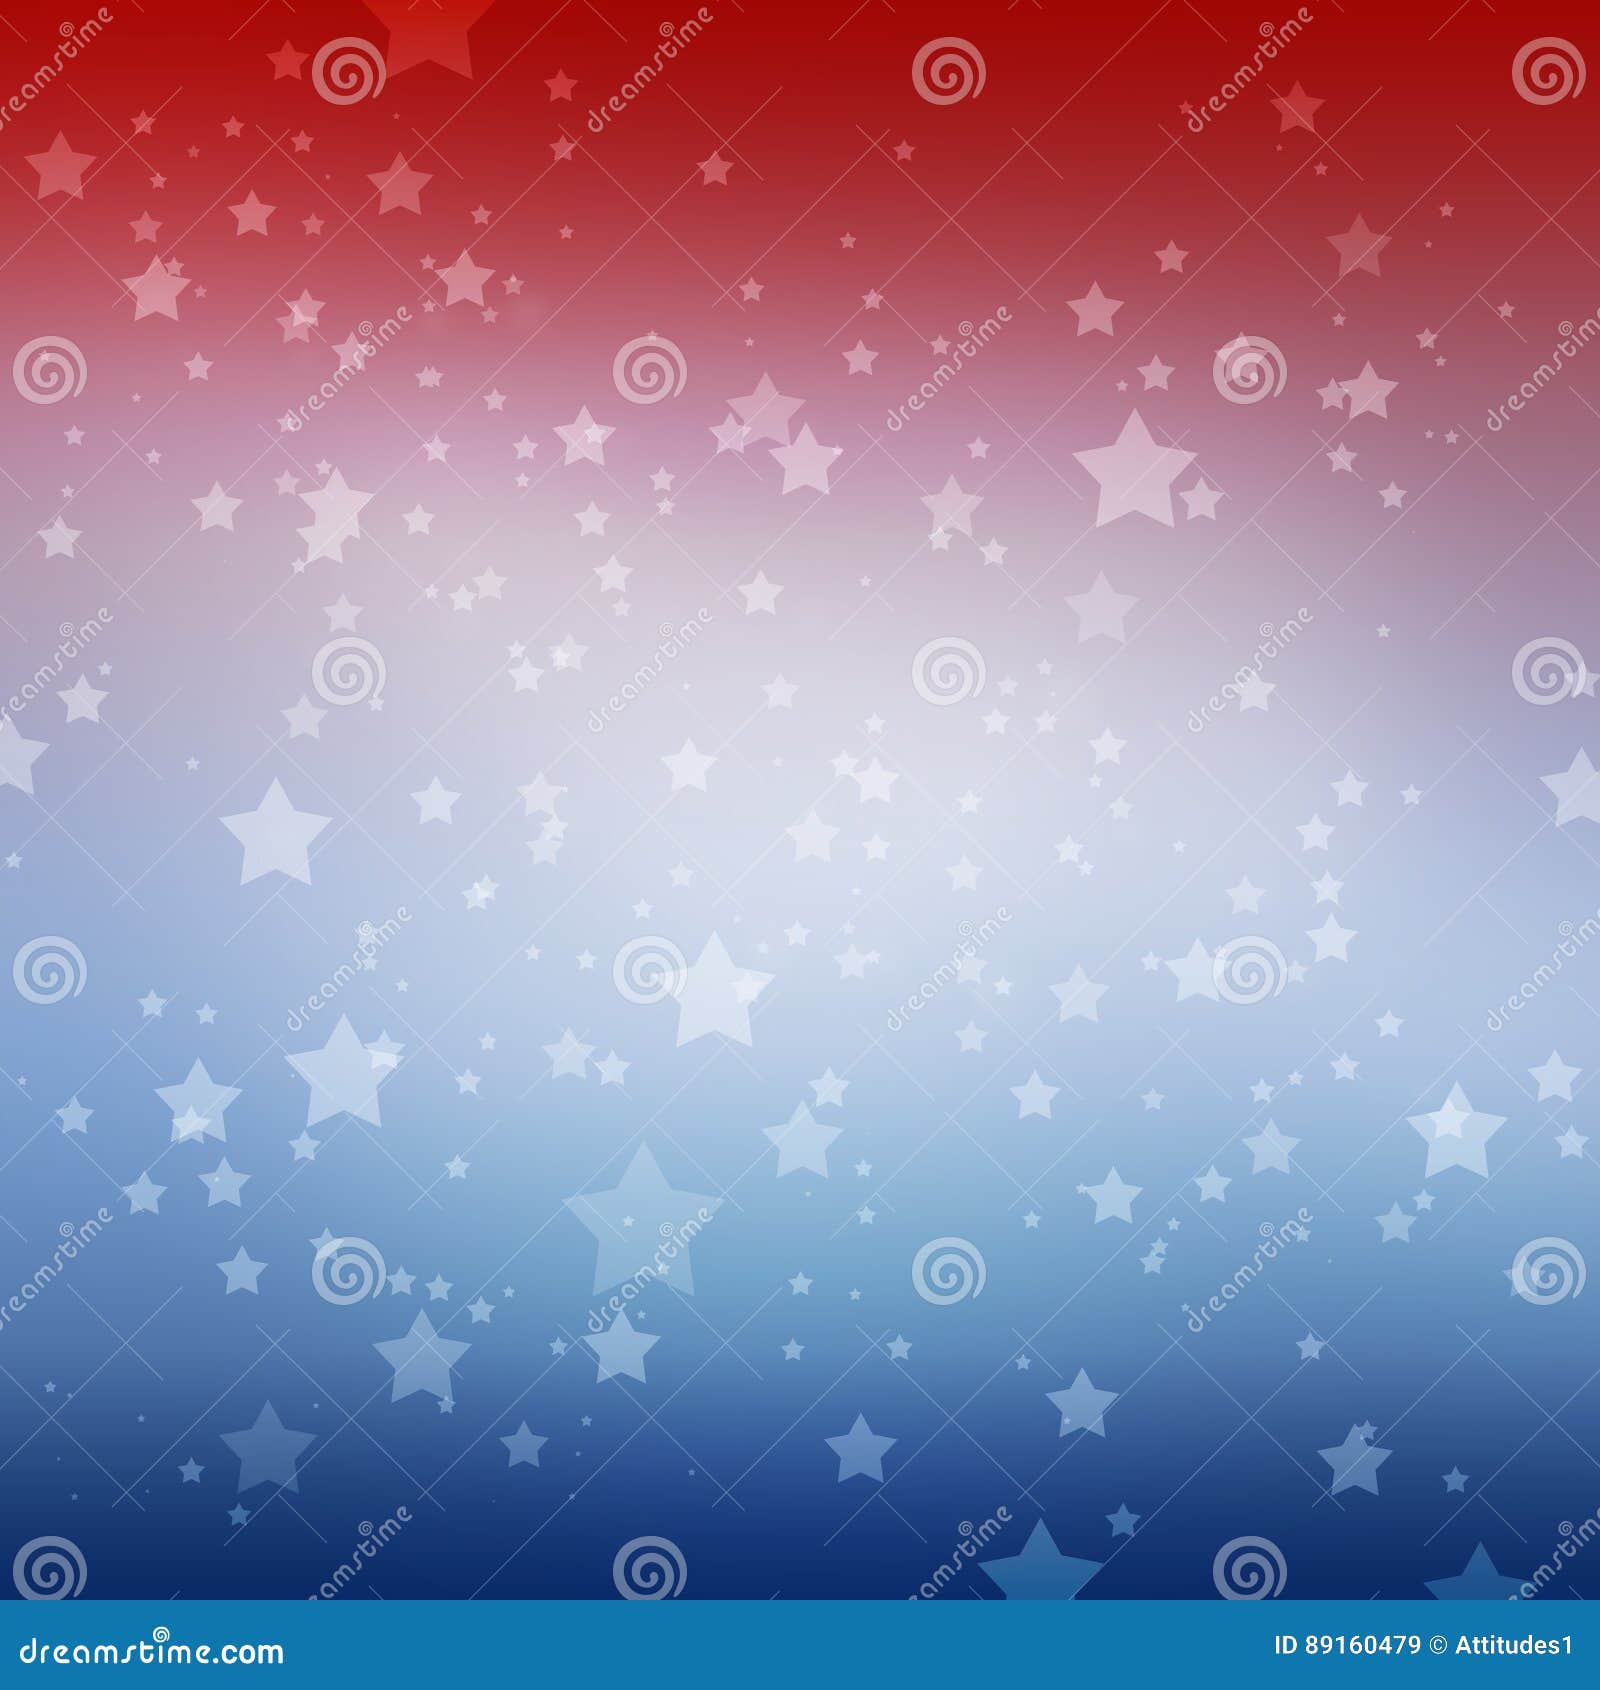 white stars on red white and blue stripes background. patriotic july 4th memorial day or election vote .